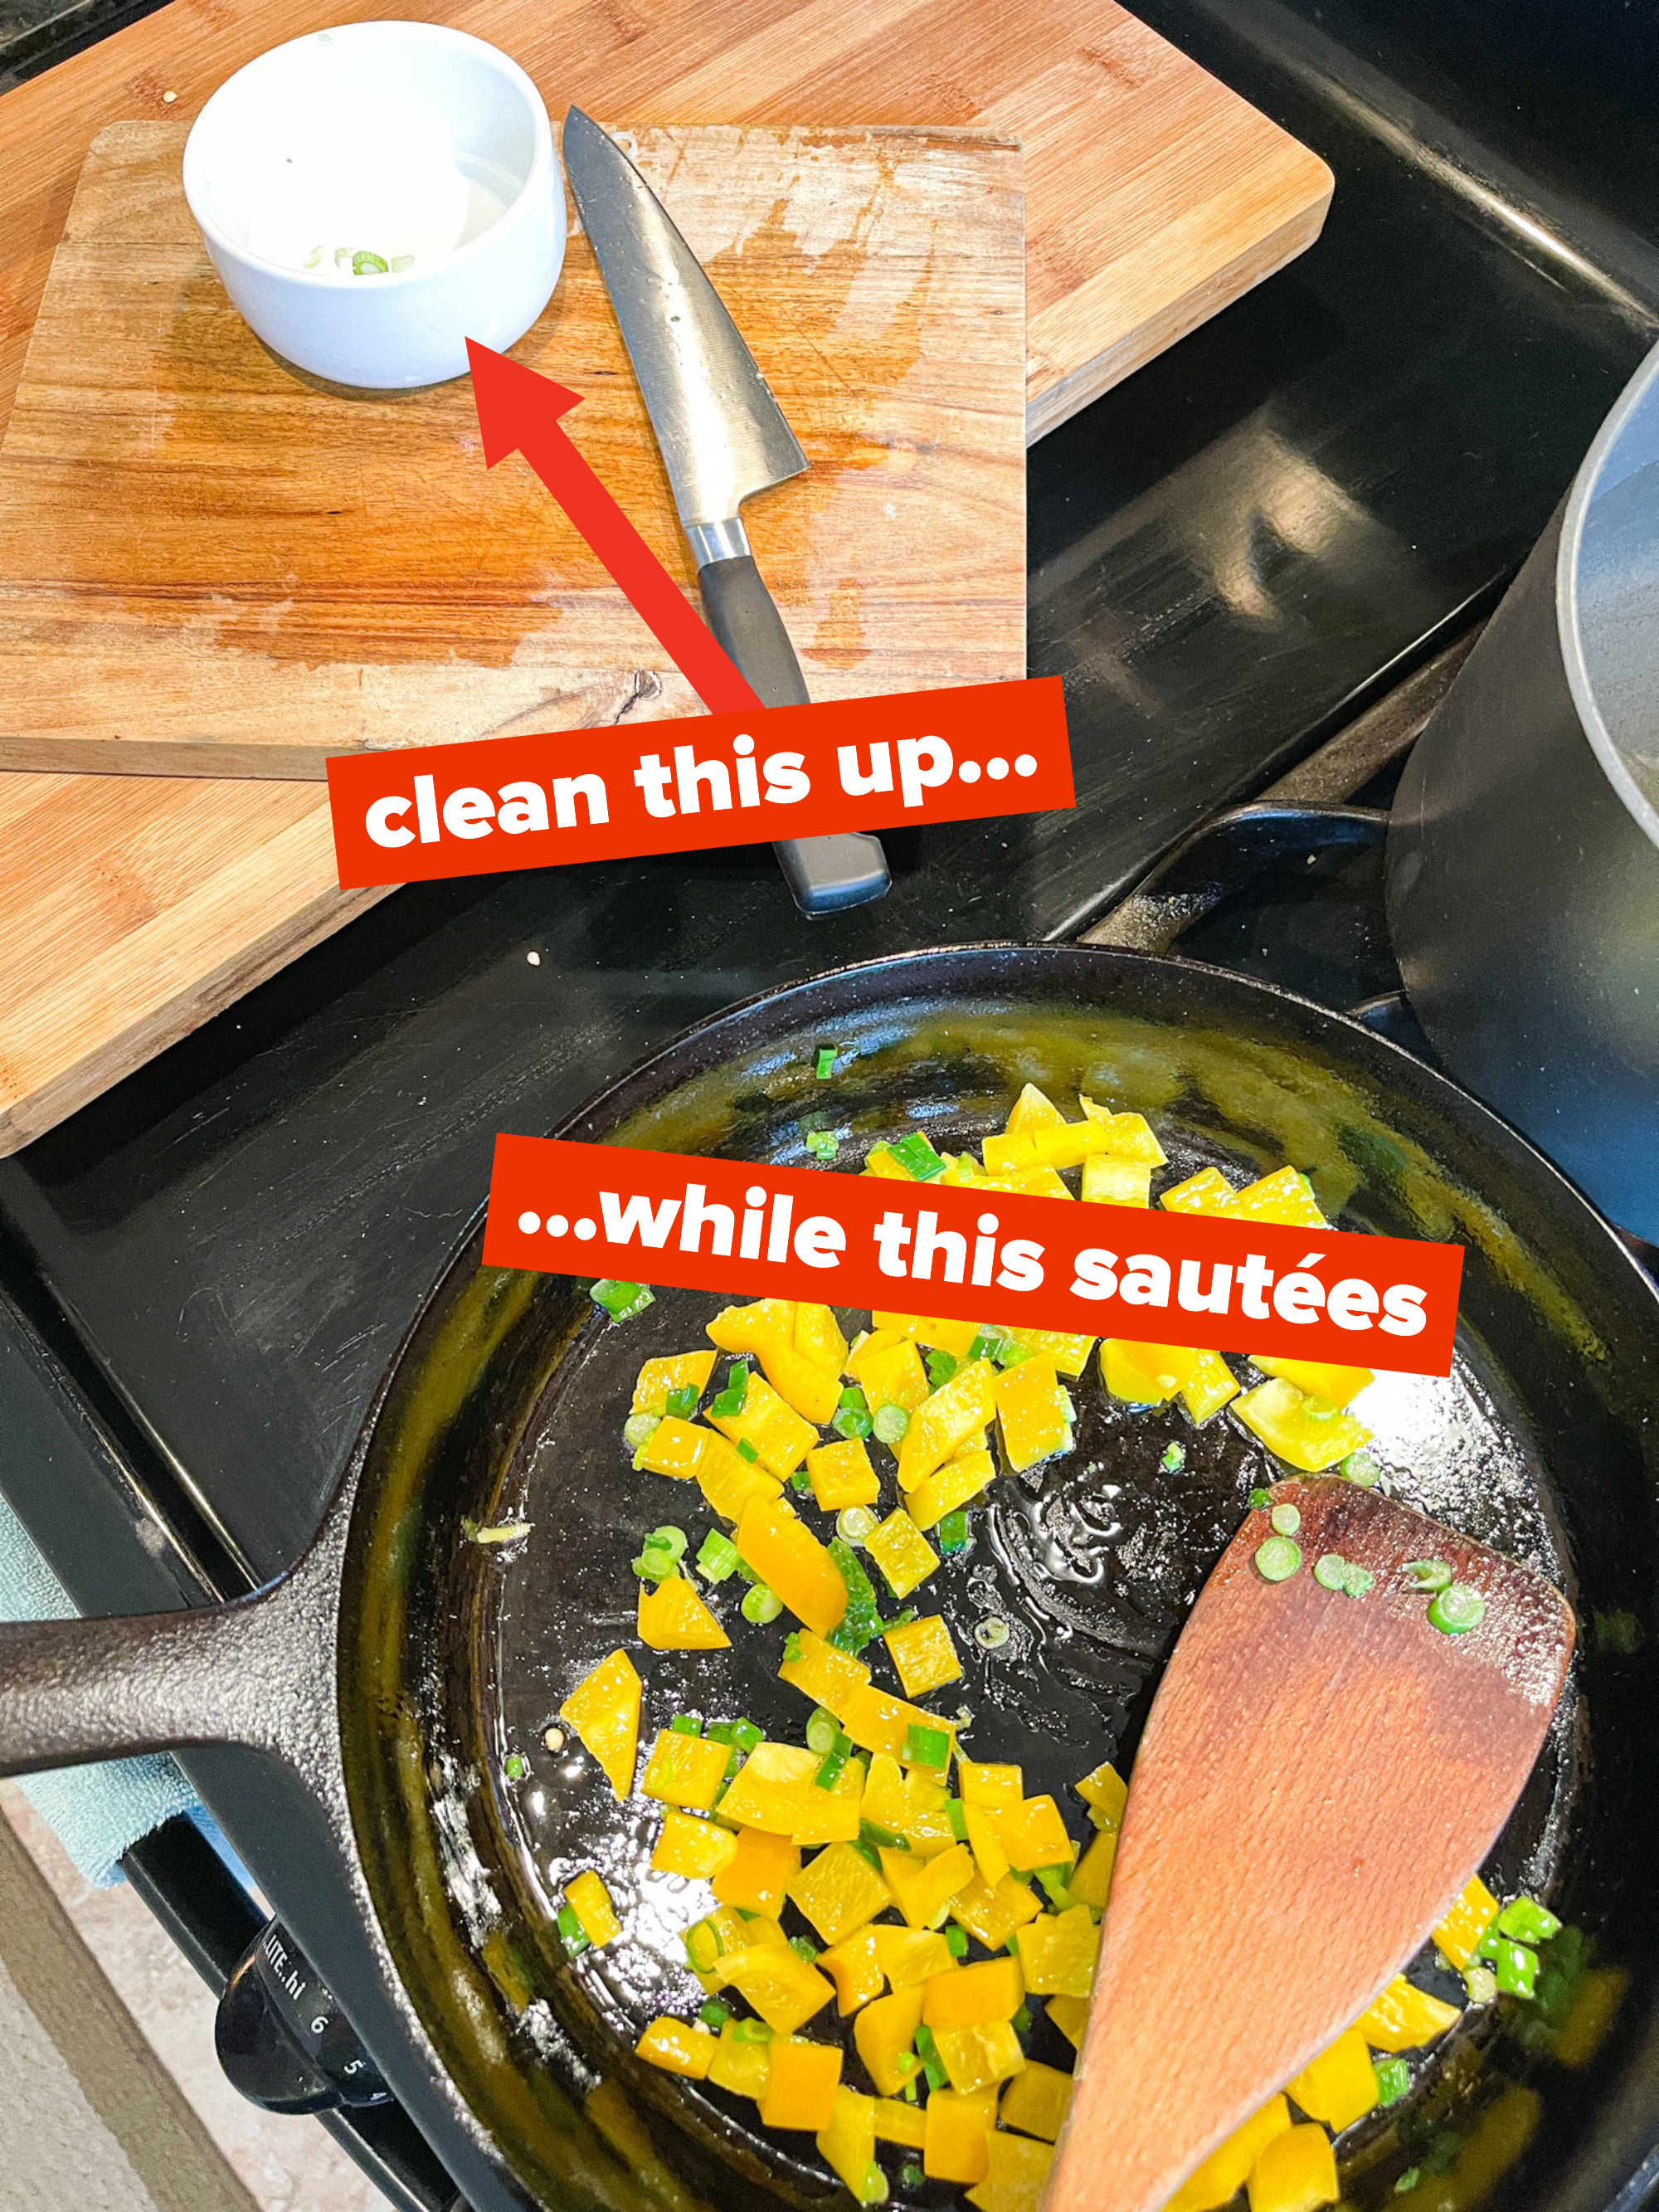 put away dirty dishes while one thing cooks